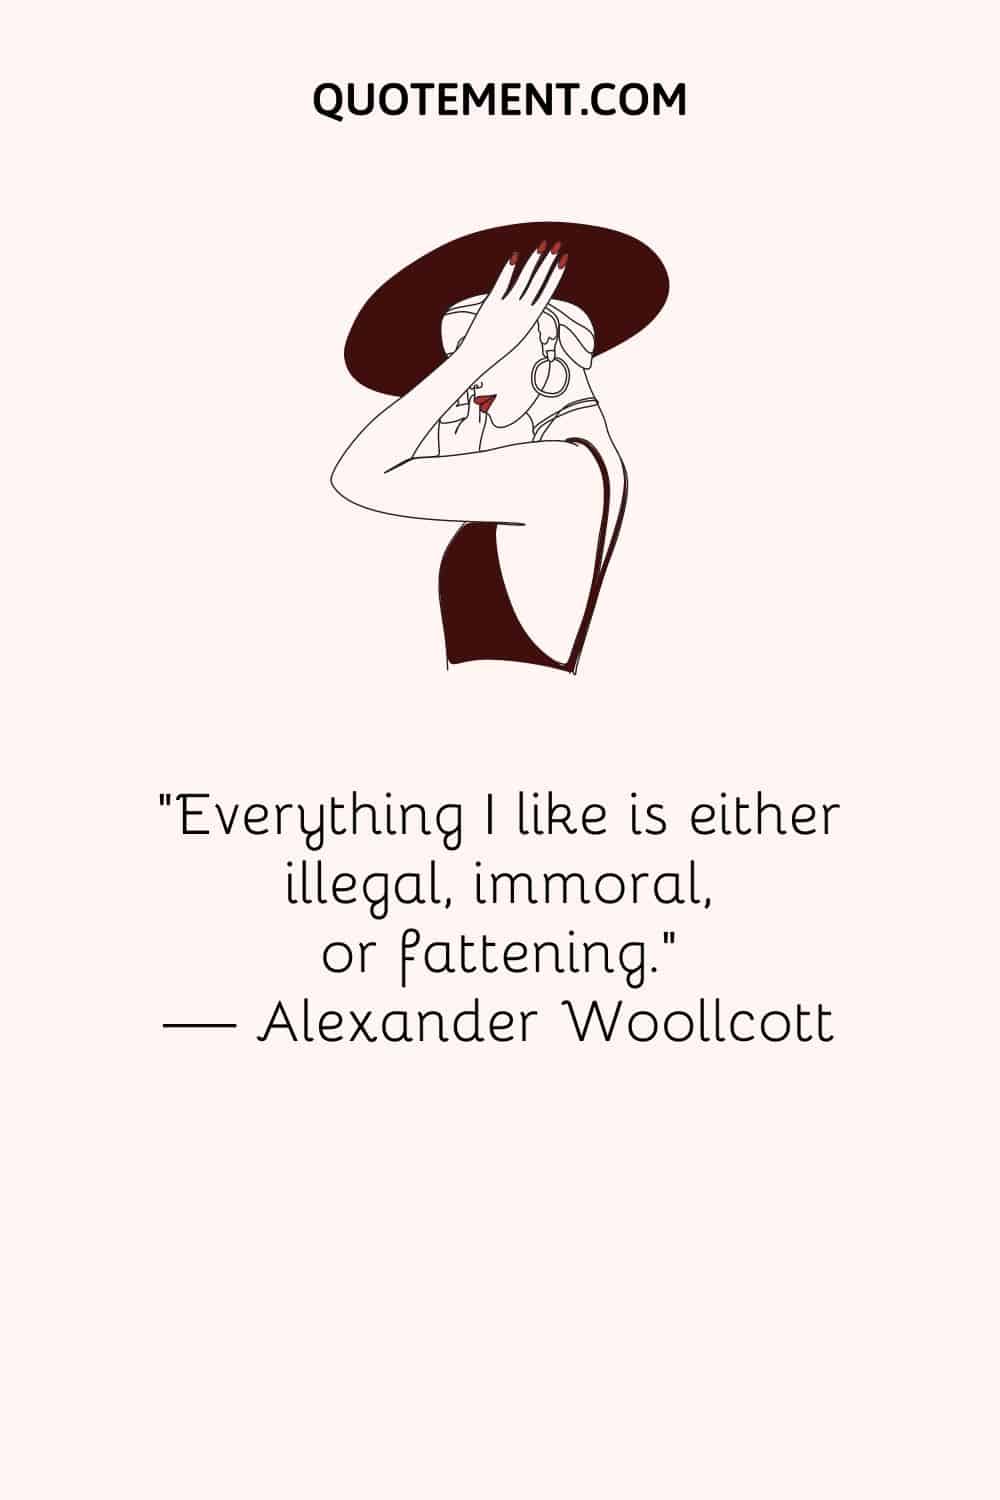 “Everything I like is either illegal, immoral, or fattening.” — Alexander Woollcott